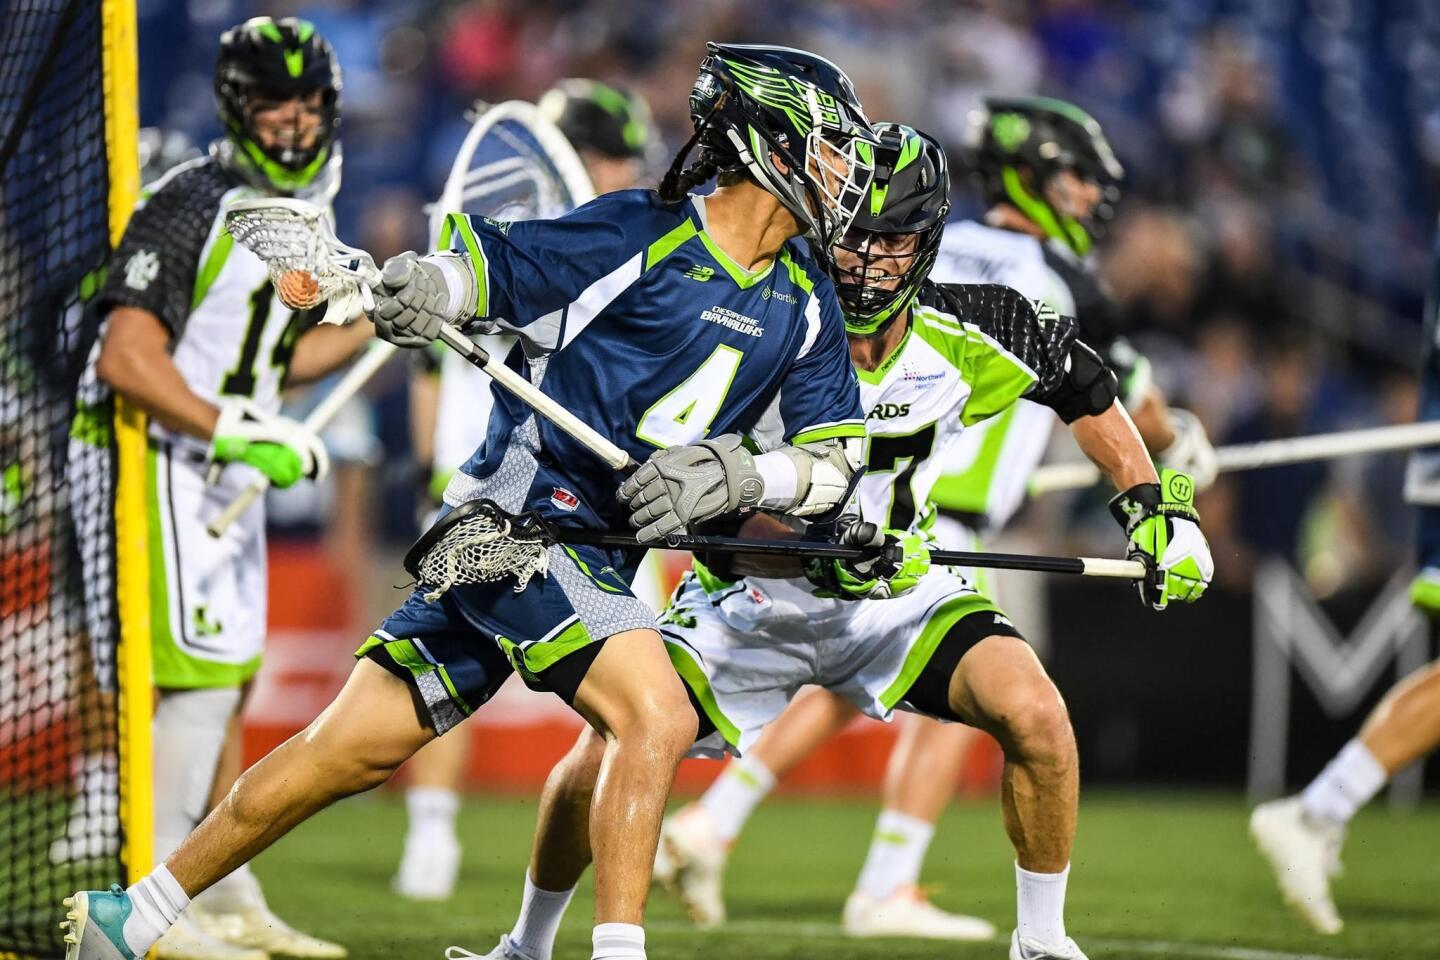 Chesapeake Bayhawks attack Lyle Thompson (4) brings the ball across the field during the first quarter against the New York Lizards at Navy-Marine Corps Memorial Stadium.